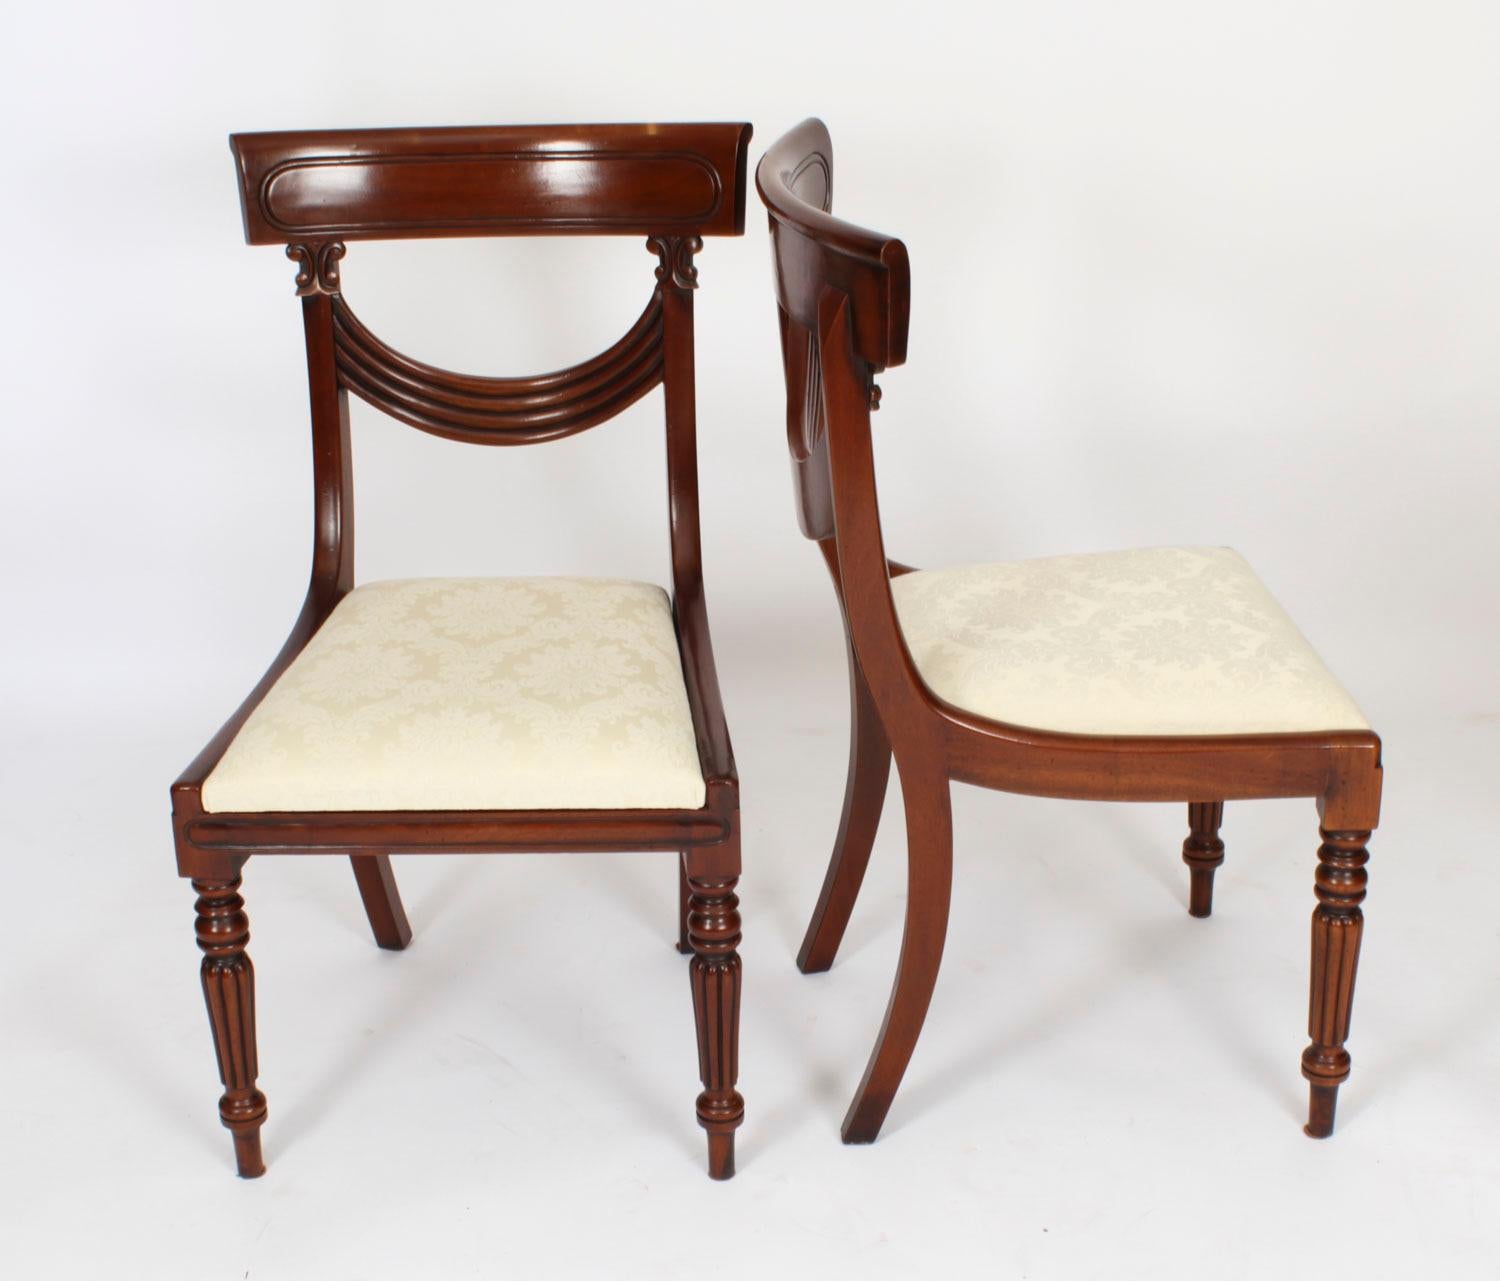 This is a fantastic Vintage English made set of 14 Regency Revival dining chairs, Circa 1980 in date.

These chairs have been masterfully crafted in beautiful solid mahogany. 

The set comprises twelve chairs and two armchairs, all of which feature